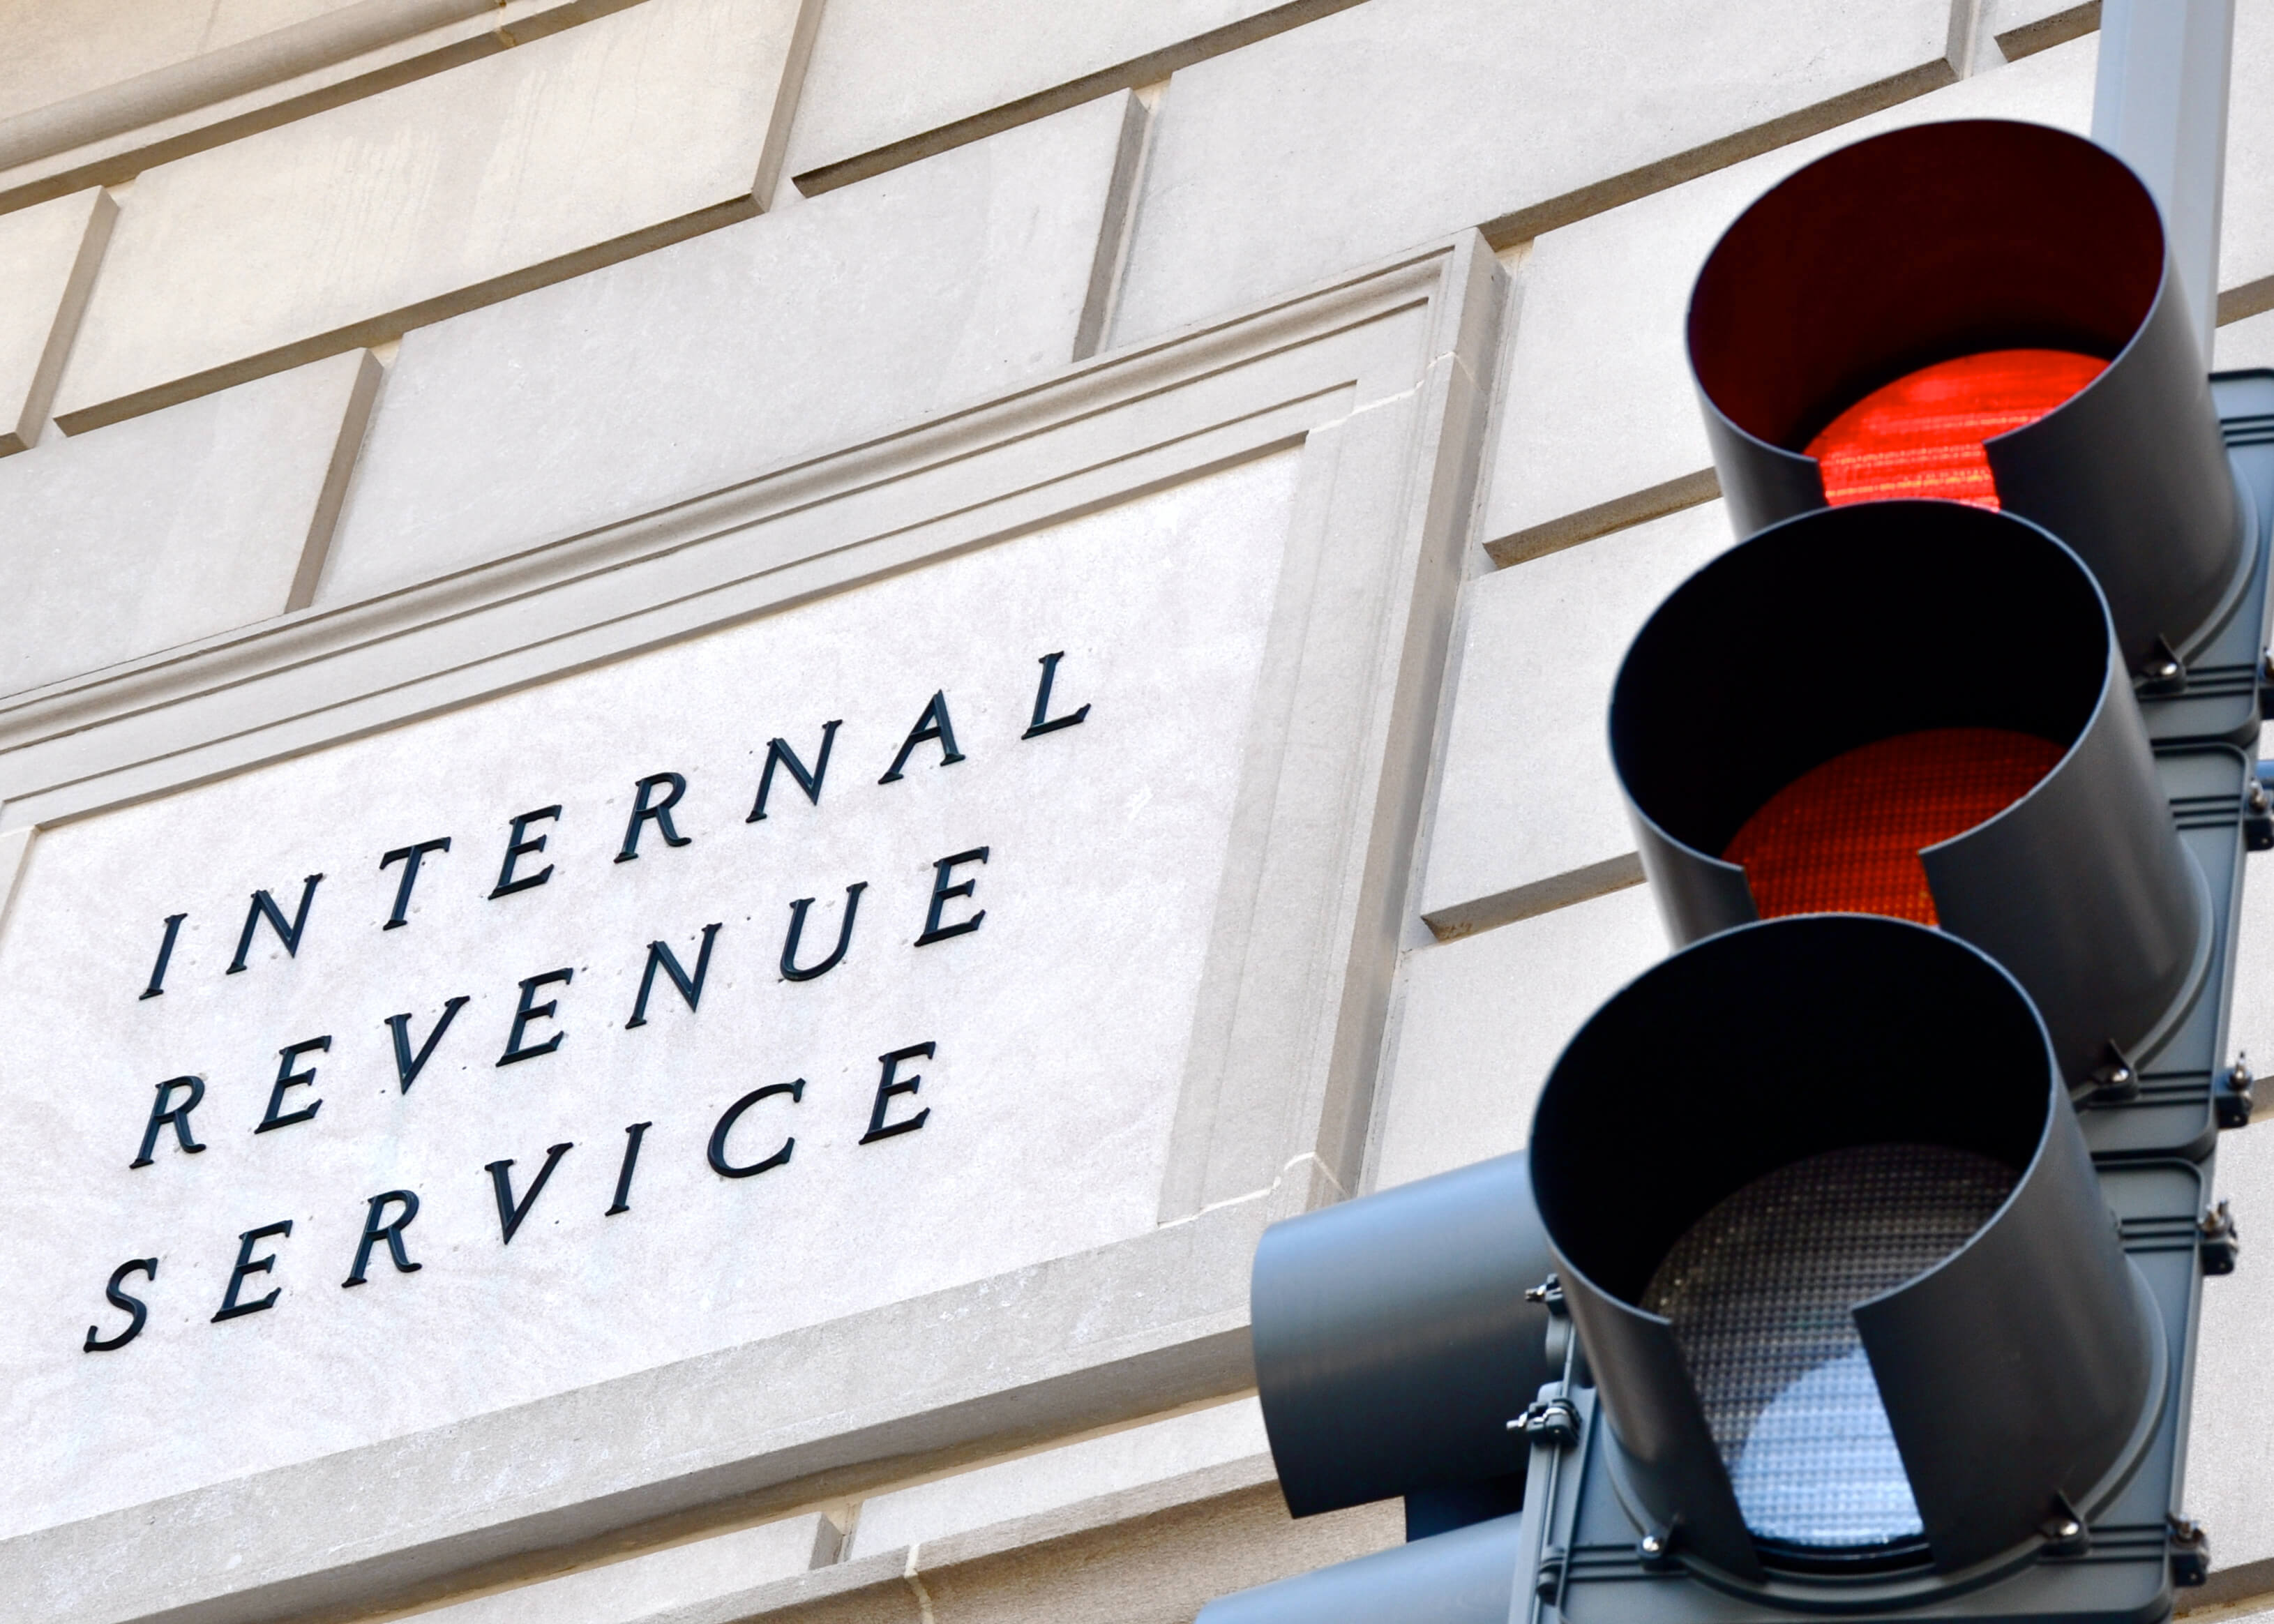 Internal Revenue Service sign with a traffic signal in the foreground indicating a red light.